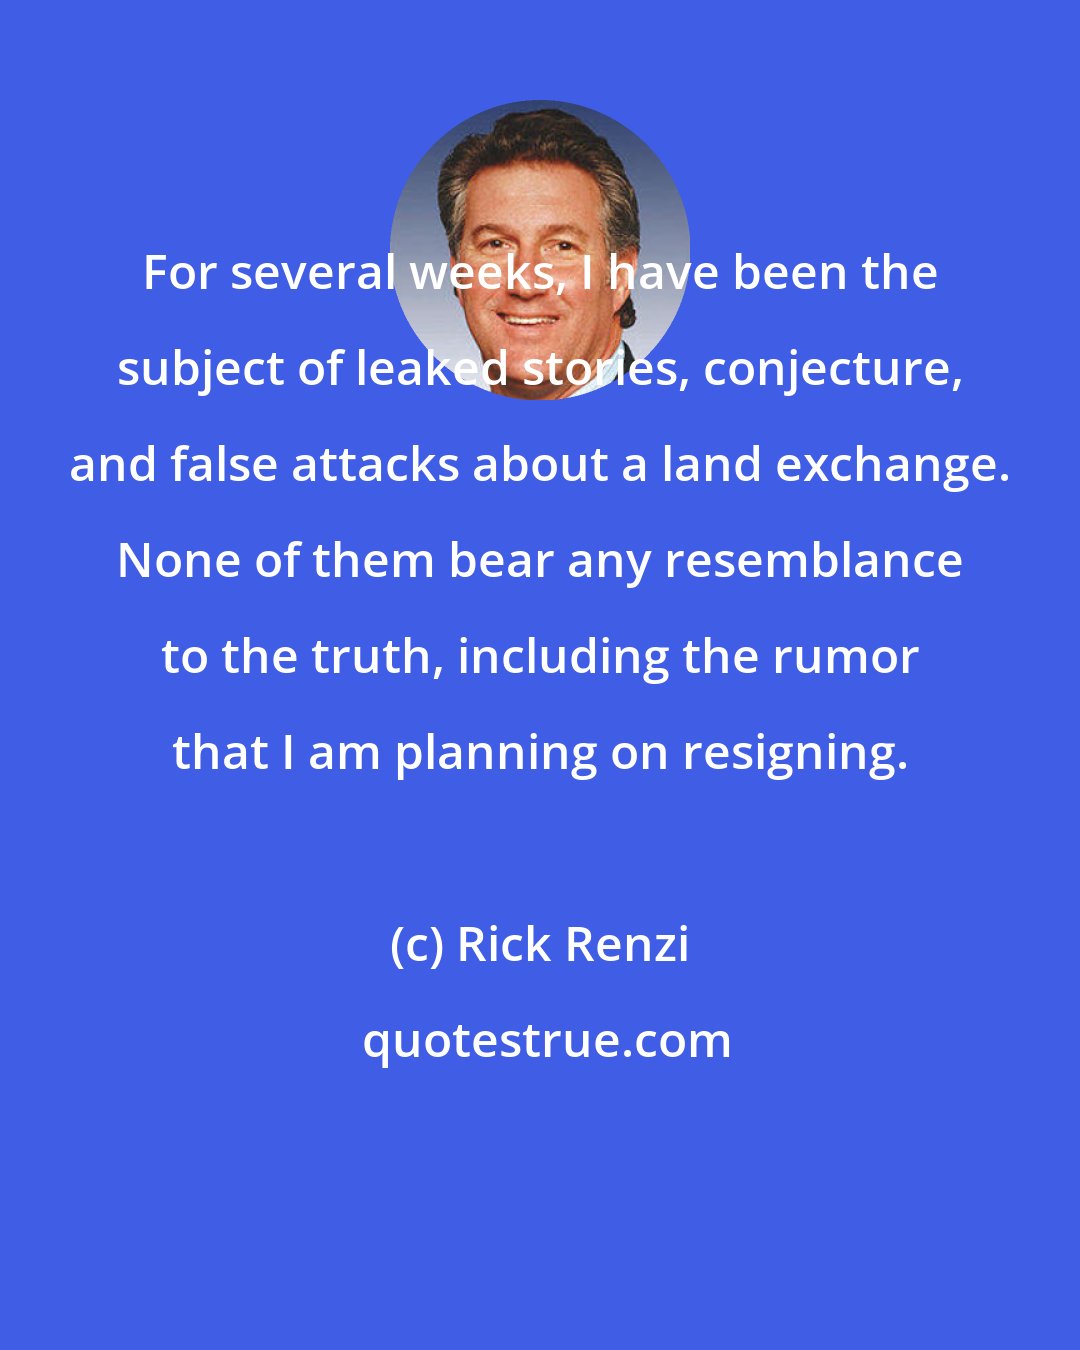 Rick Renzi: For several weeks, I have been the subject of leaked stories, conjecture, and false attacks about a land exchange. None of them bear any resemblance to the truth, including the rumor that I am planning on resigning.